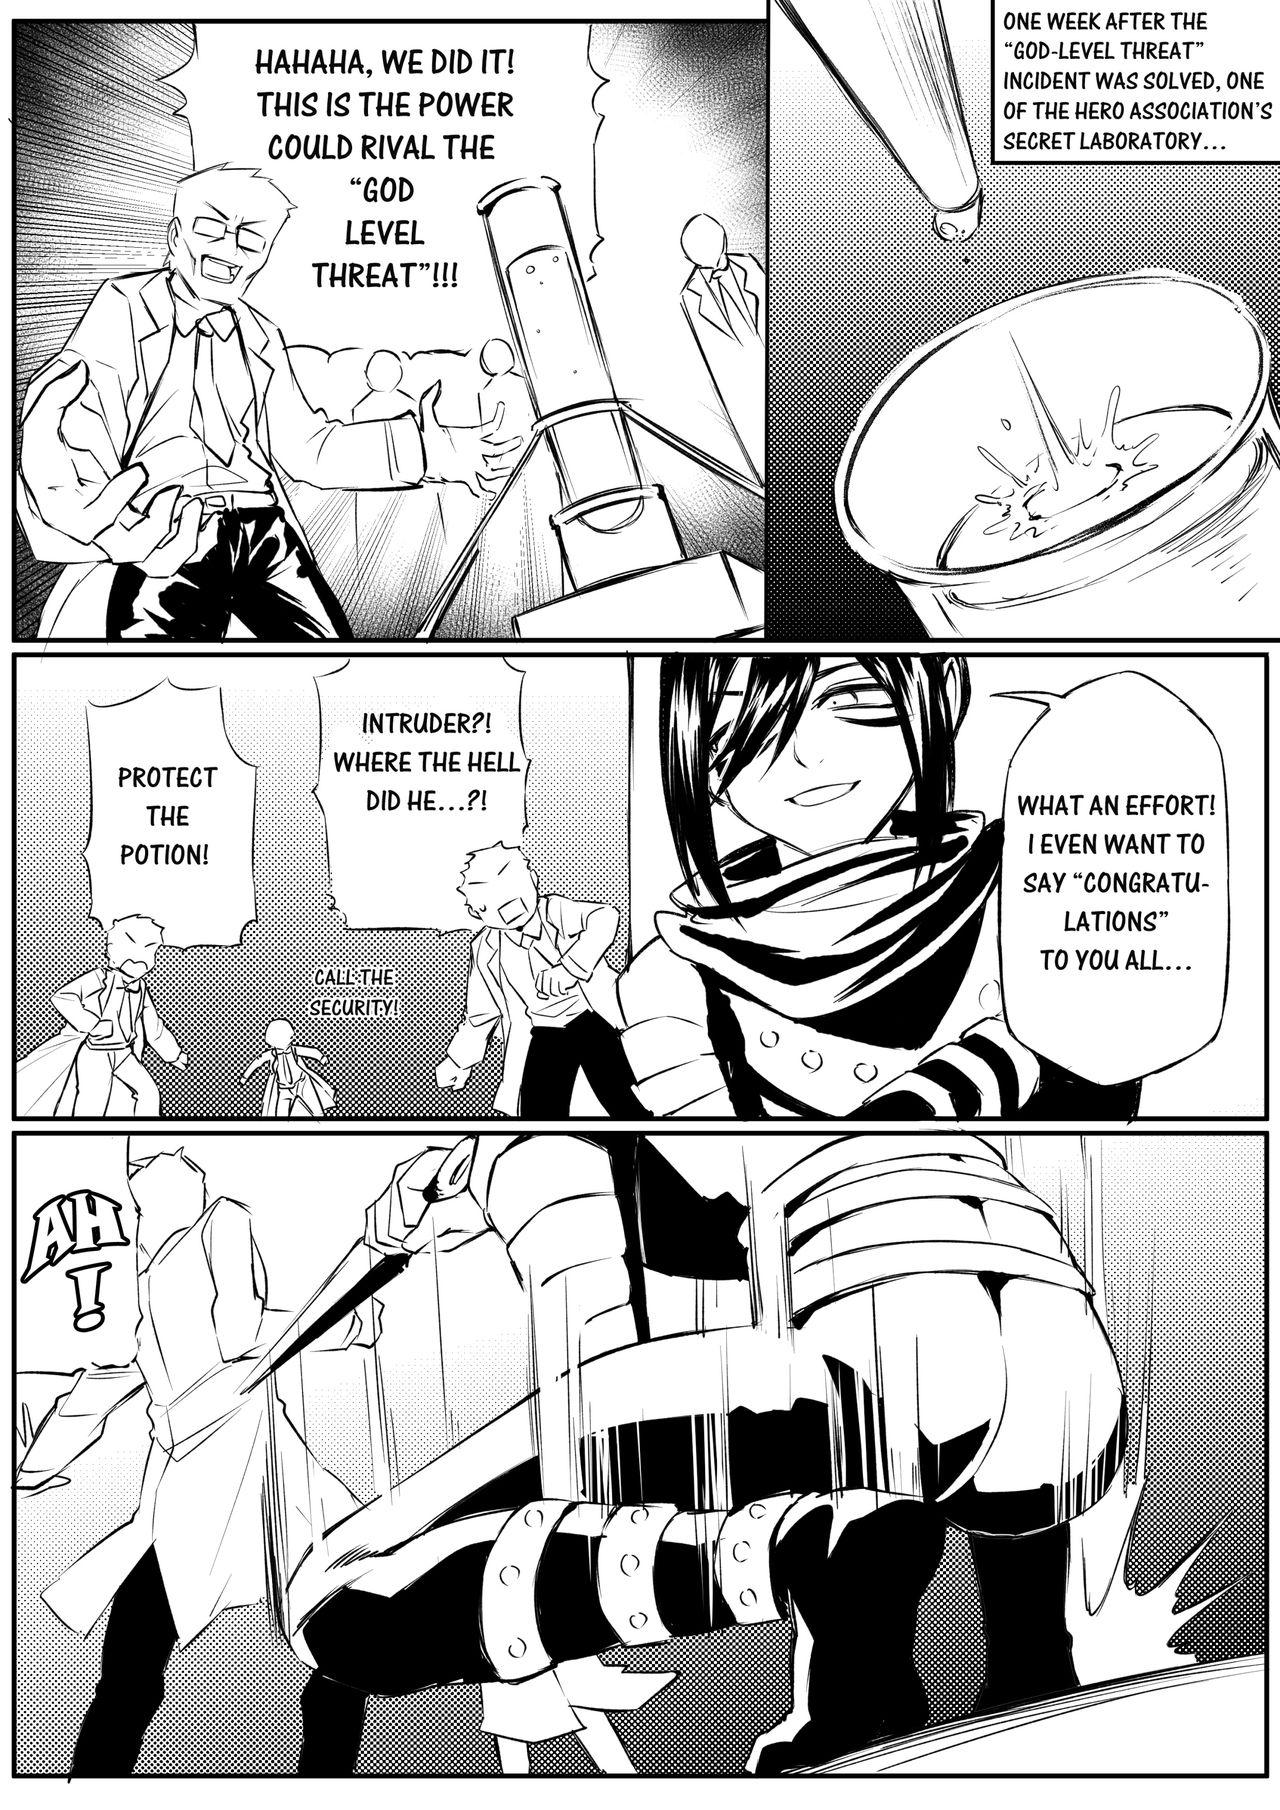 Cousin Attack on Sonico - One punch man Shesafreak - Page 2